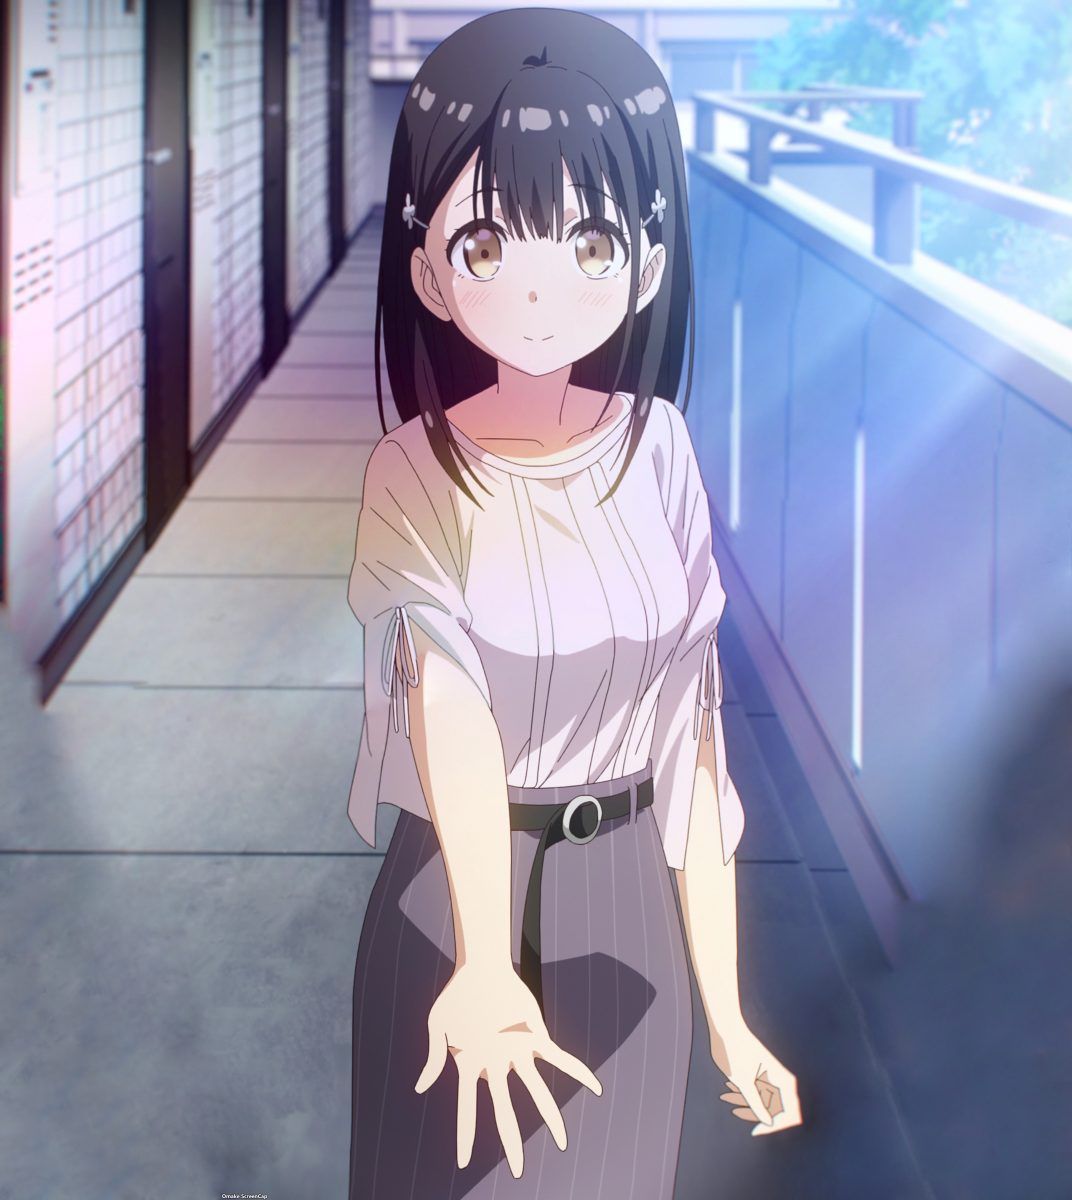 One Room Third Season Episode 12 [END] Yui Offers Hand